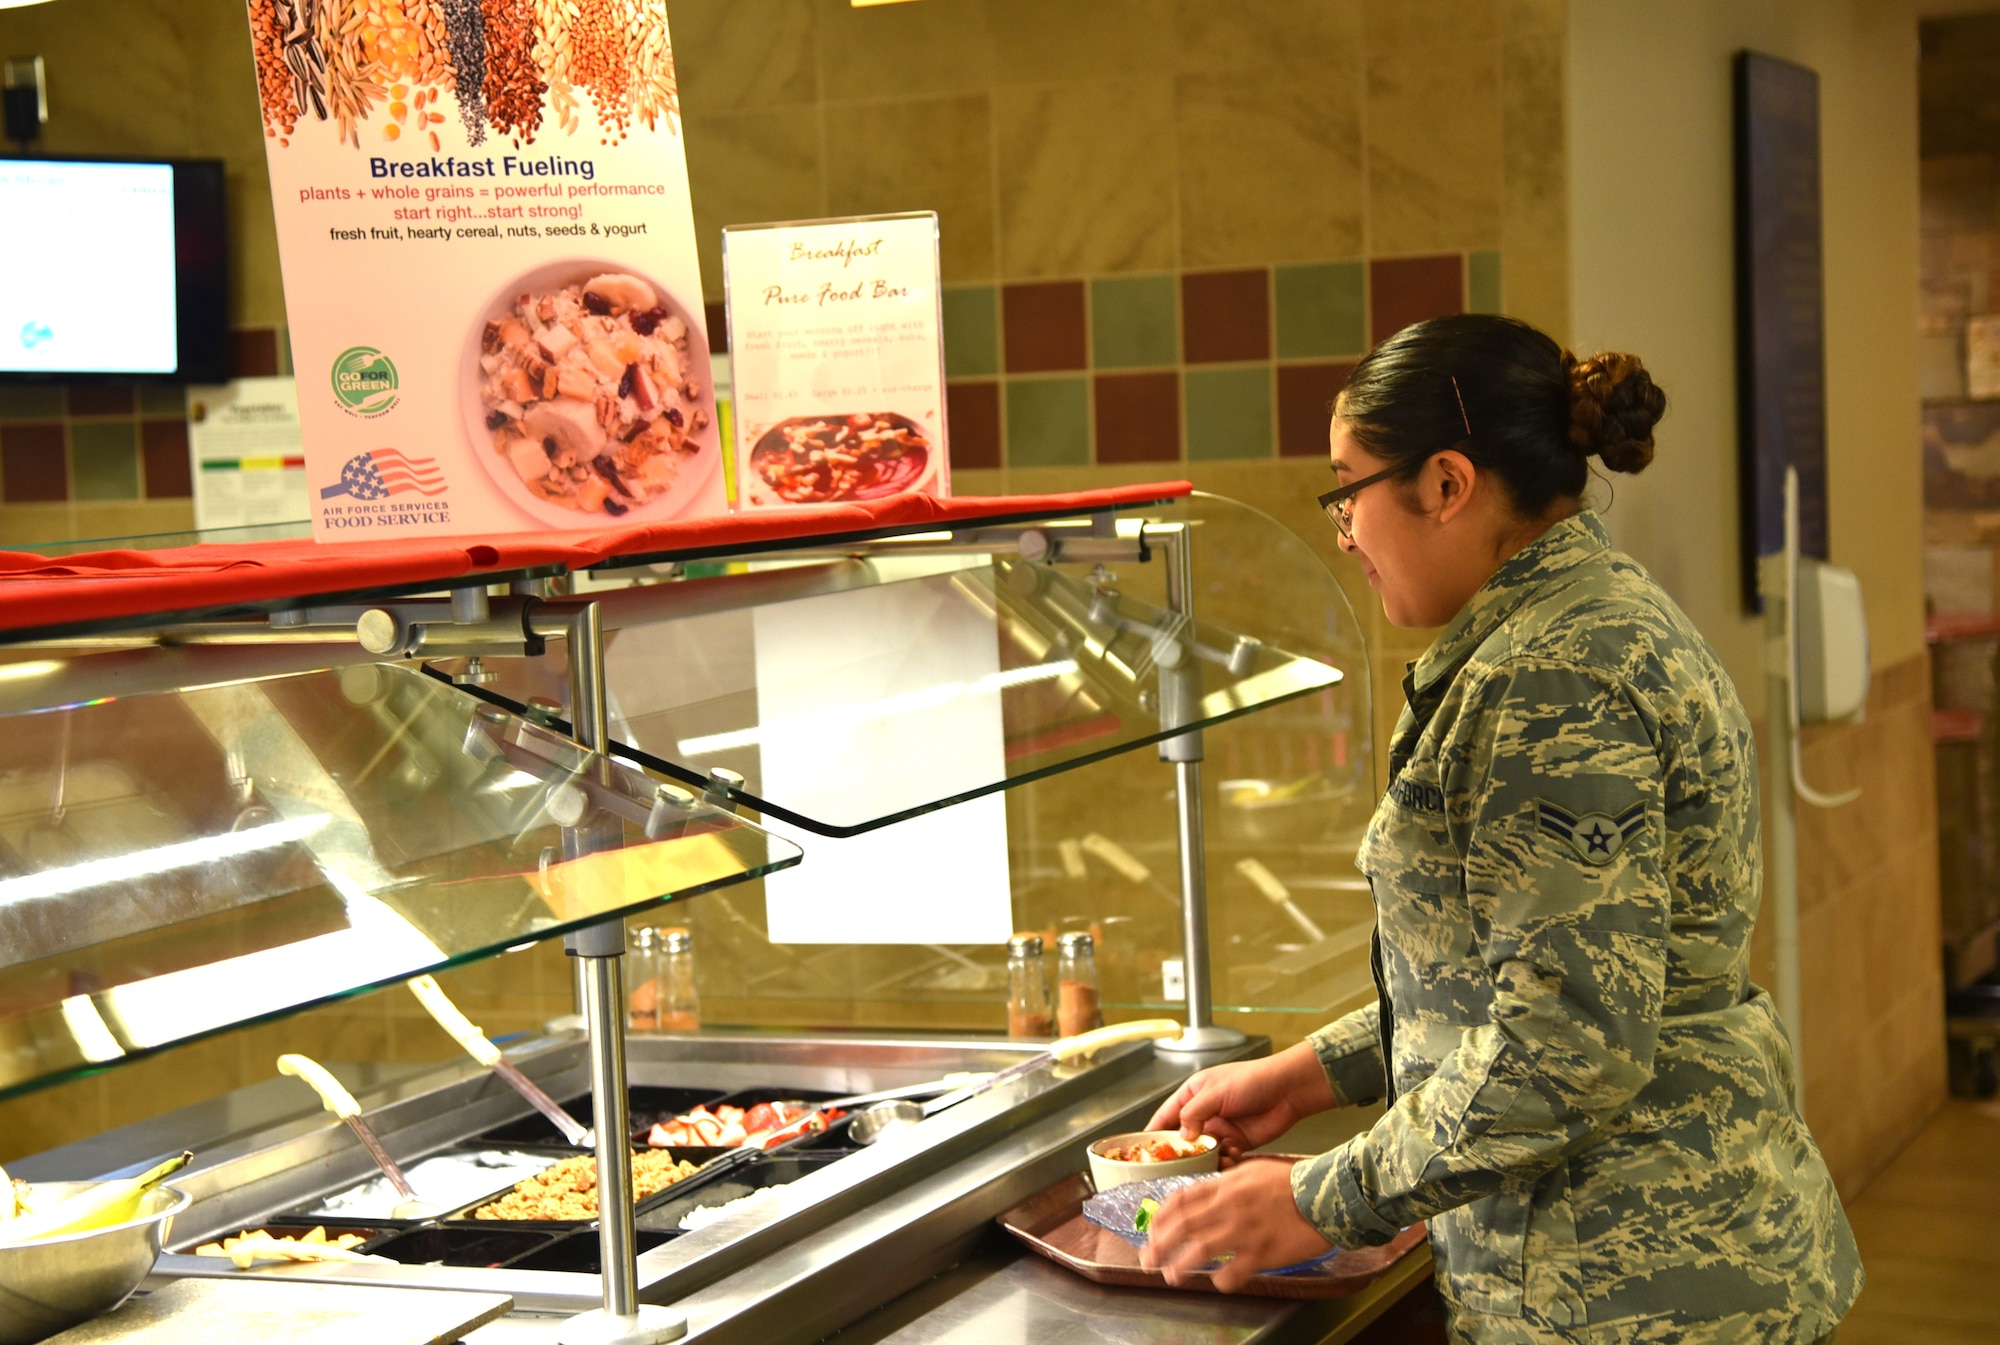 An Airman builds her meal using fresh, health options on the Pure Bar at the Aragon Dining Facility on Peterson AFB, Colorado. Pure Bars, packed with whole grains, fresh fruits and other more nutritional offerings, are part of the Air Force's Go For Green program designed to provide healthy, power fueling for Airmen. (U.S. Air Force photo by Carrie Grover)